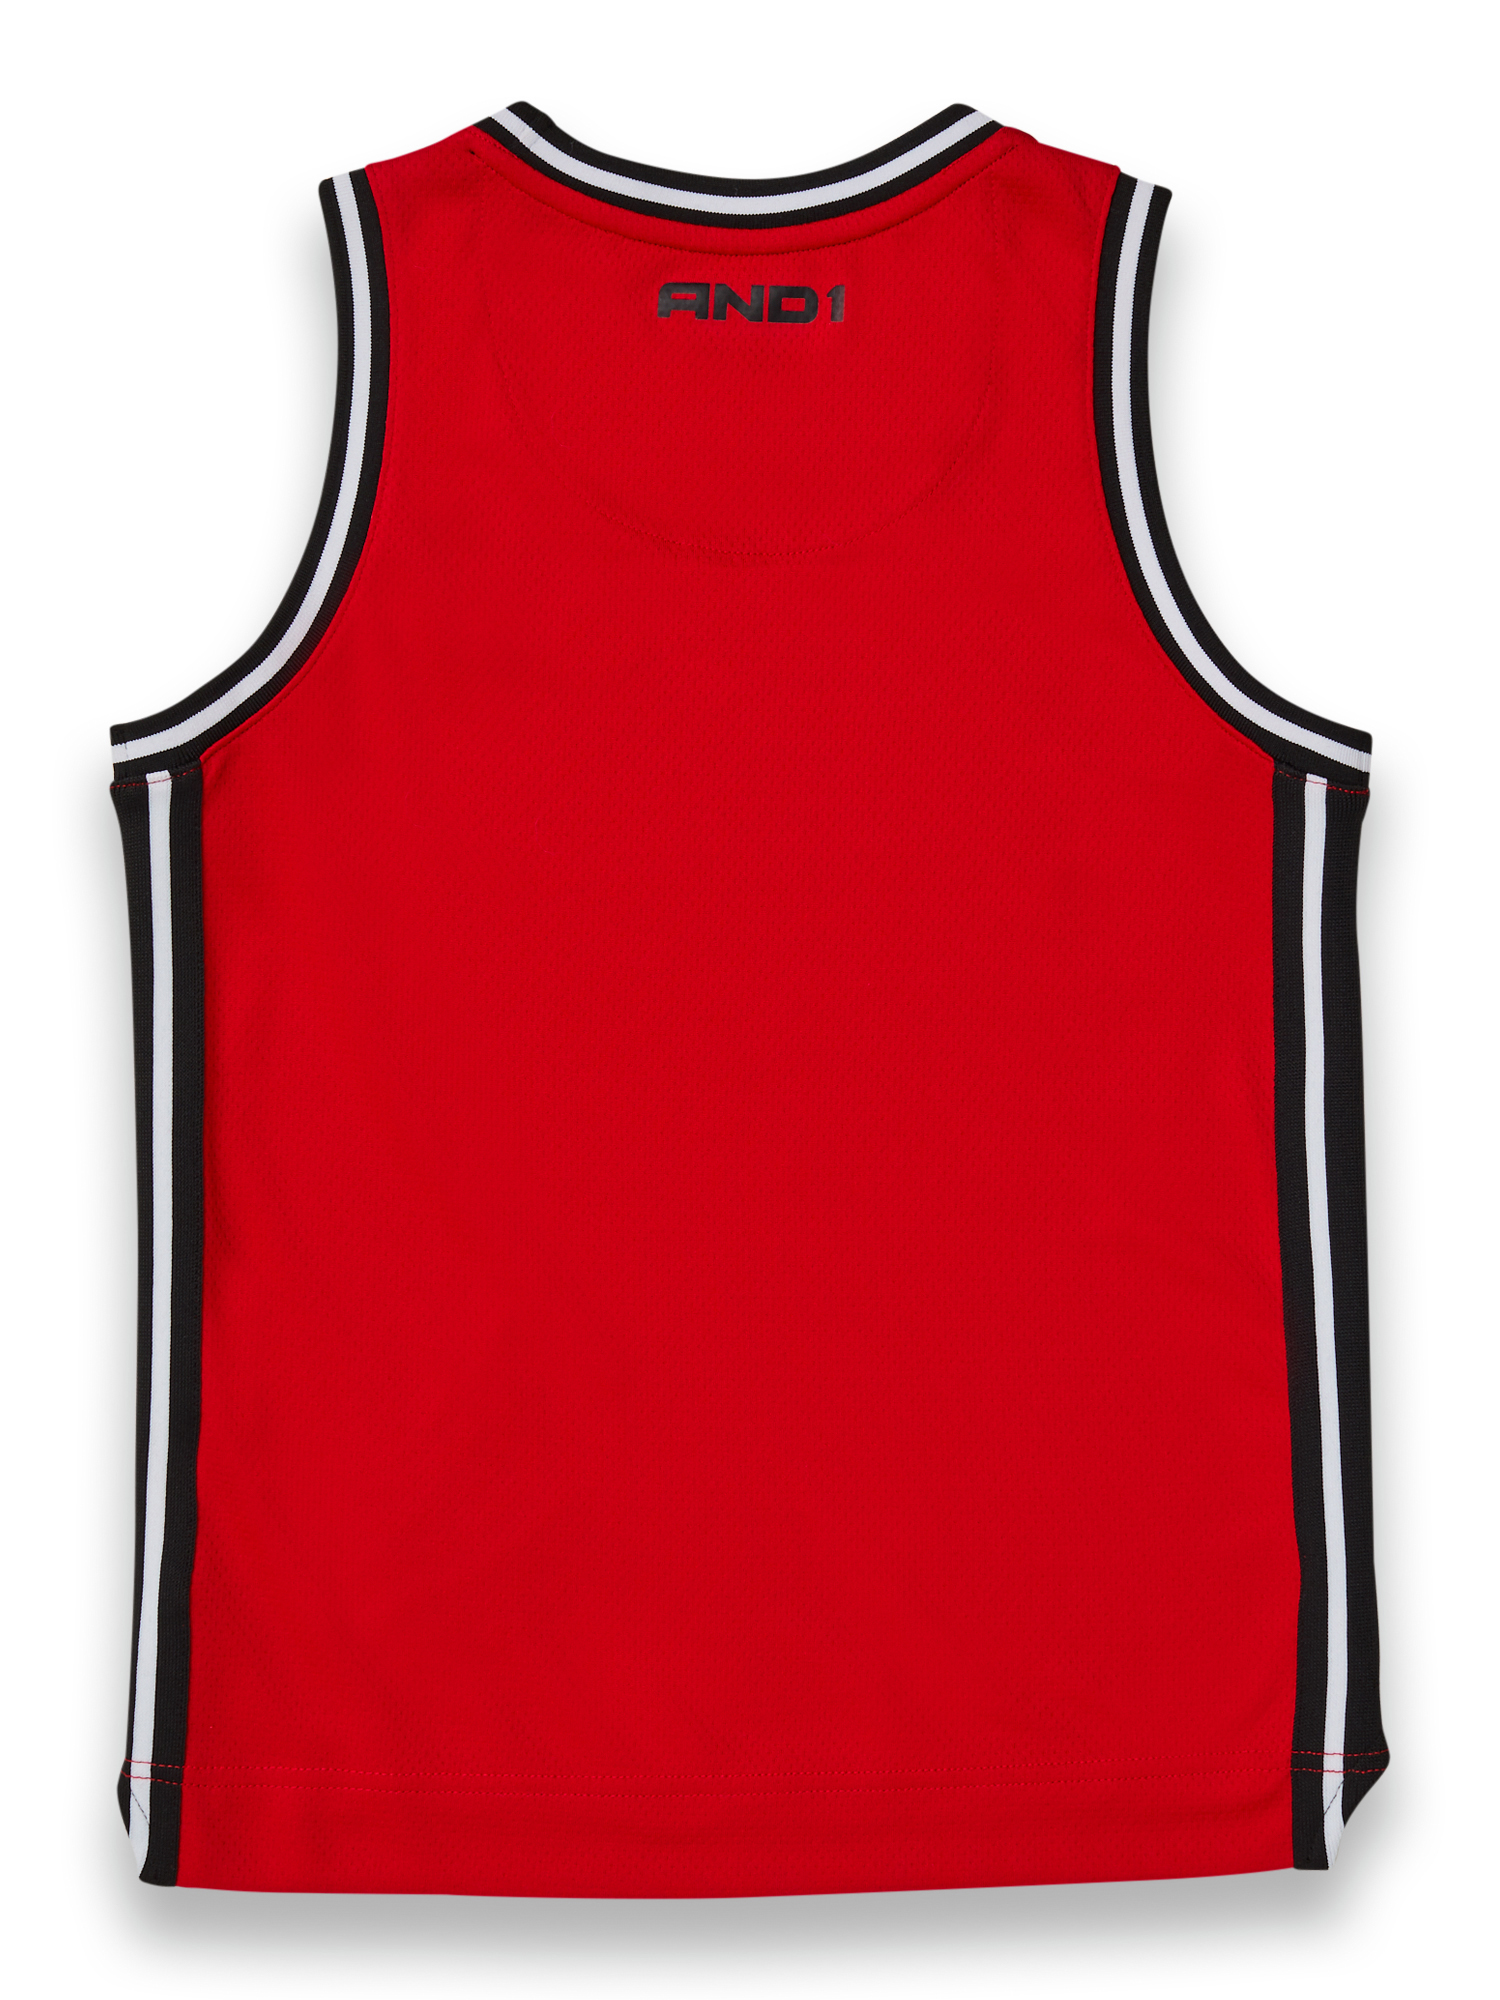 AND1 Boys Jersey Tank & Basketball Shorts 2-Piece Outfit Set, Sizes 4-18 - image 3 of 5